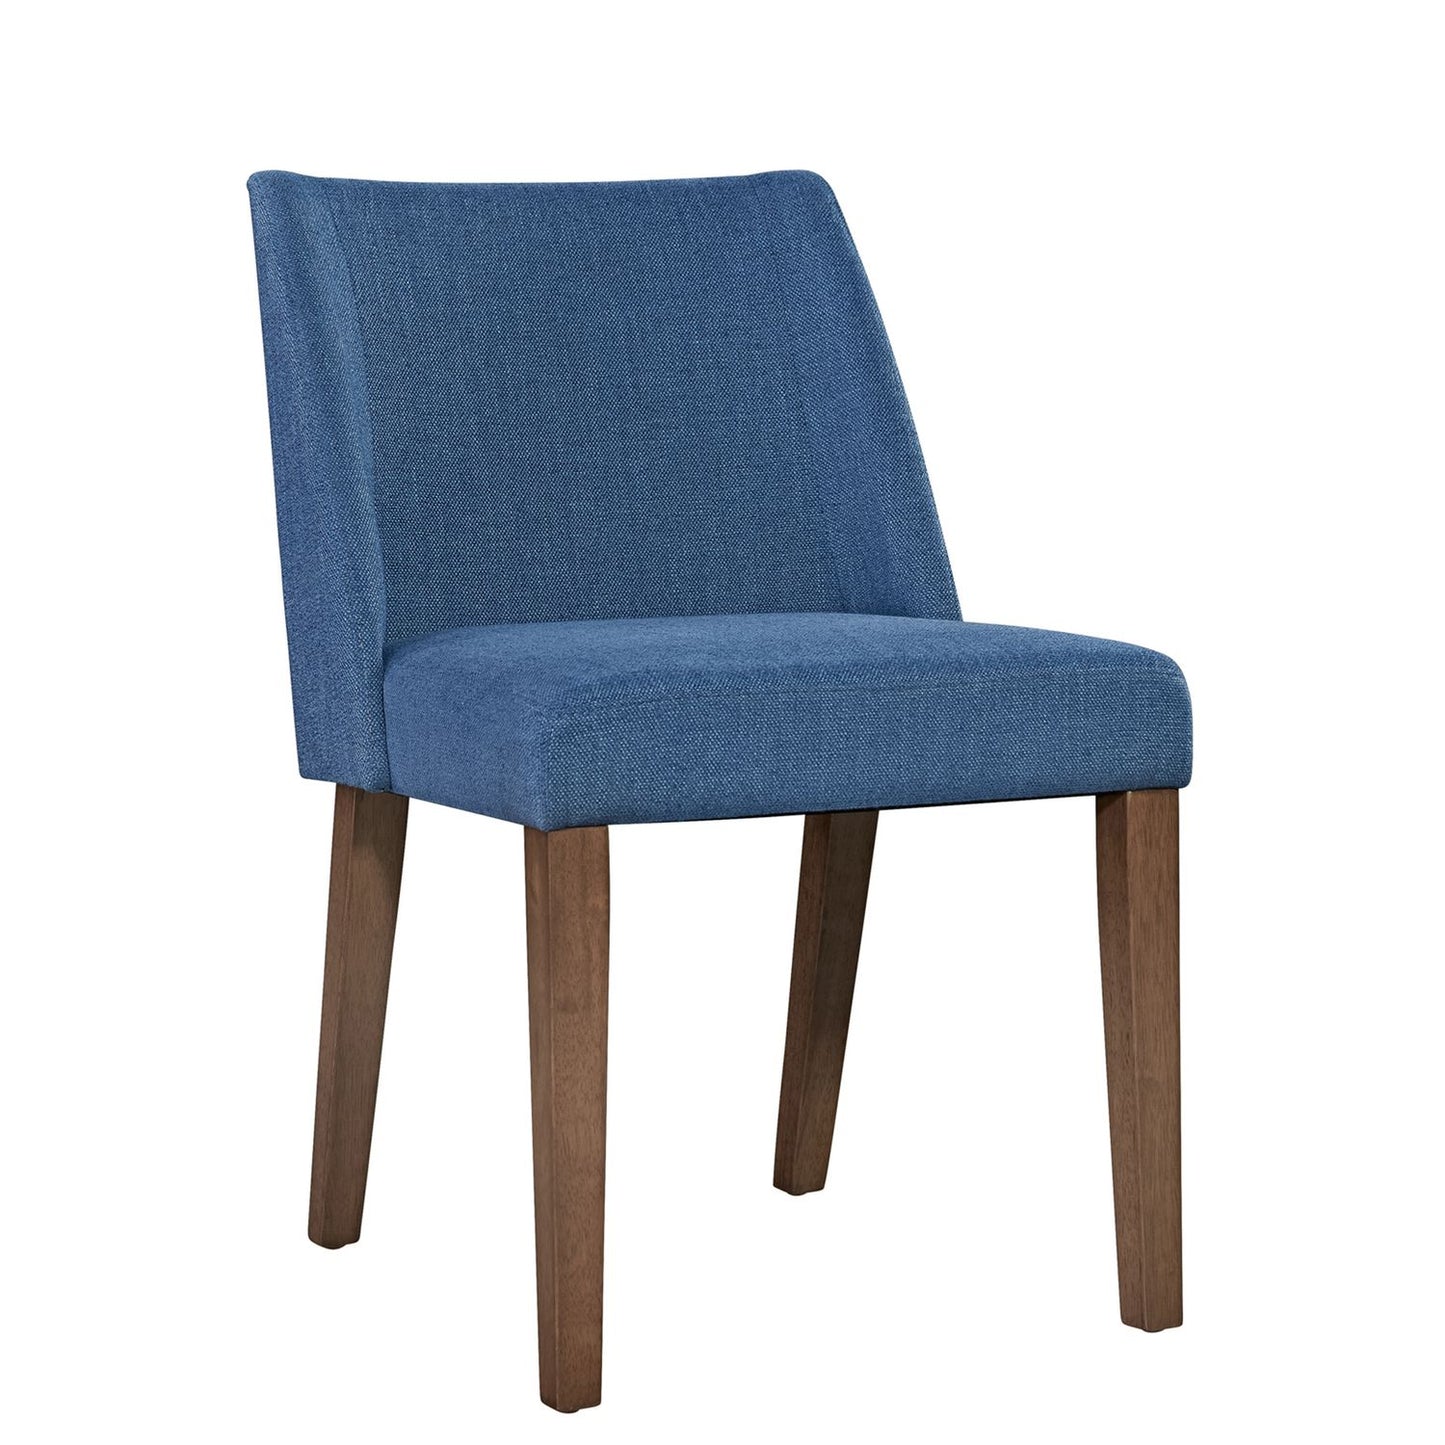 Space Savers Group Nido Dining Or Accent Chair Blue